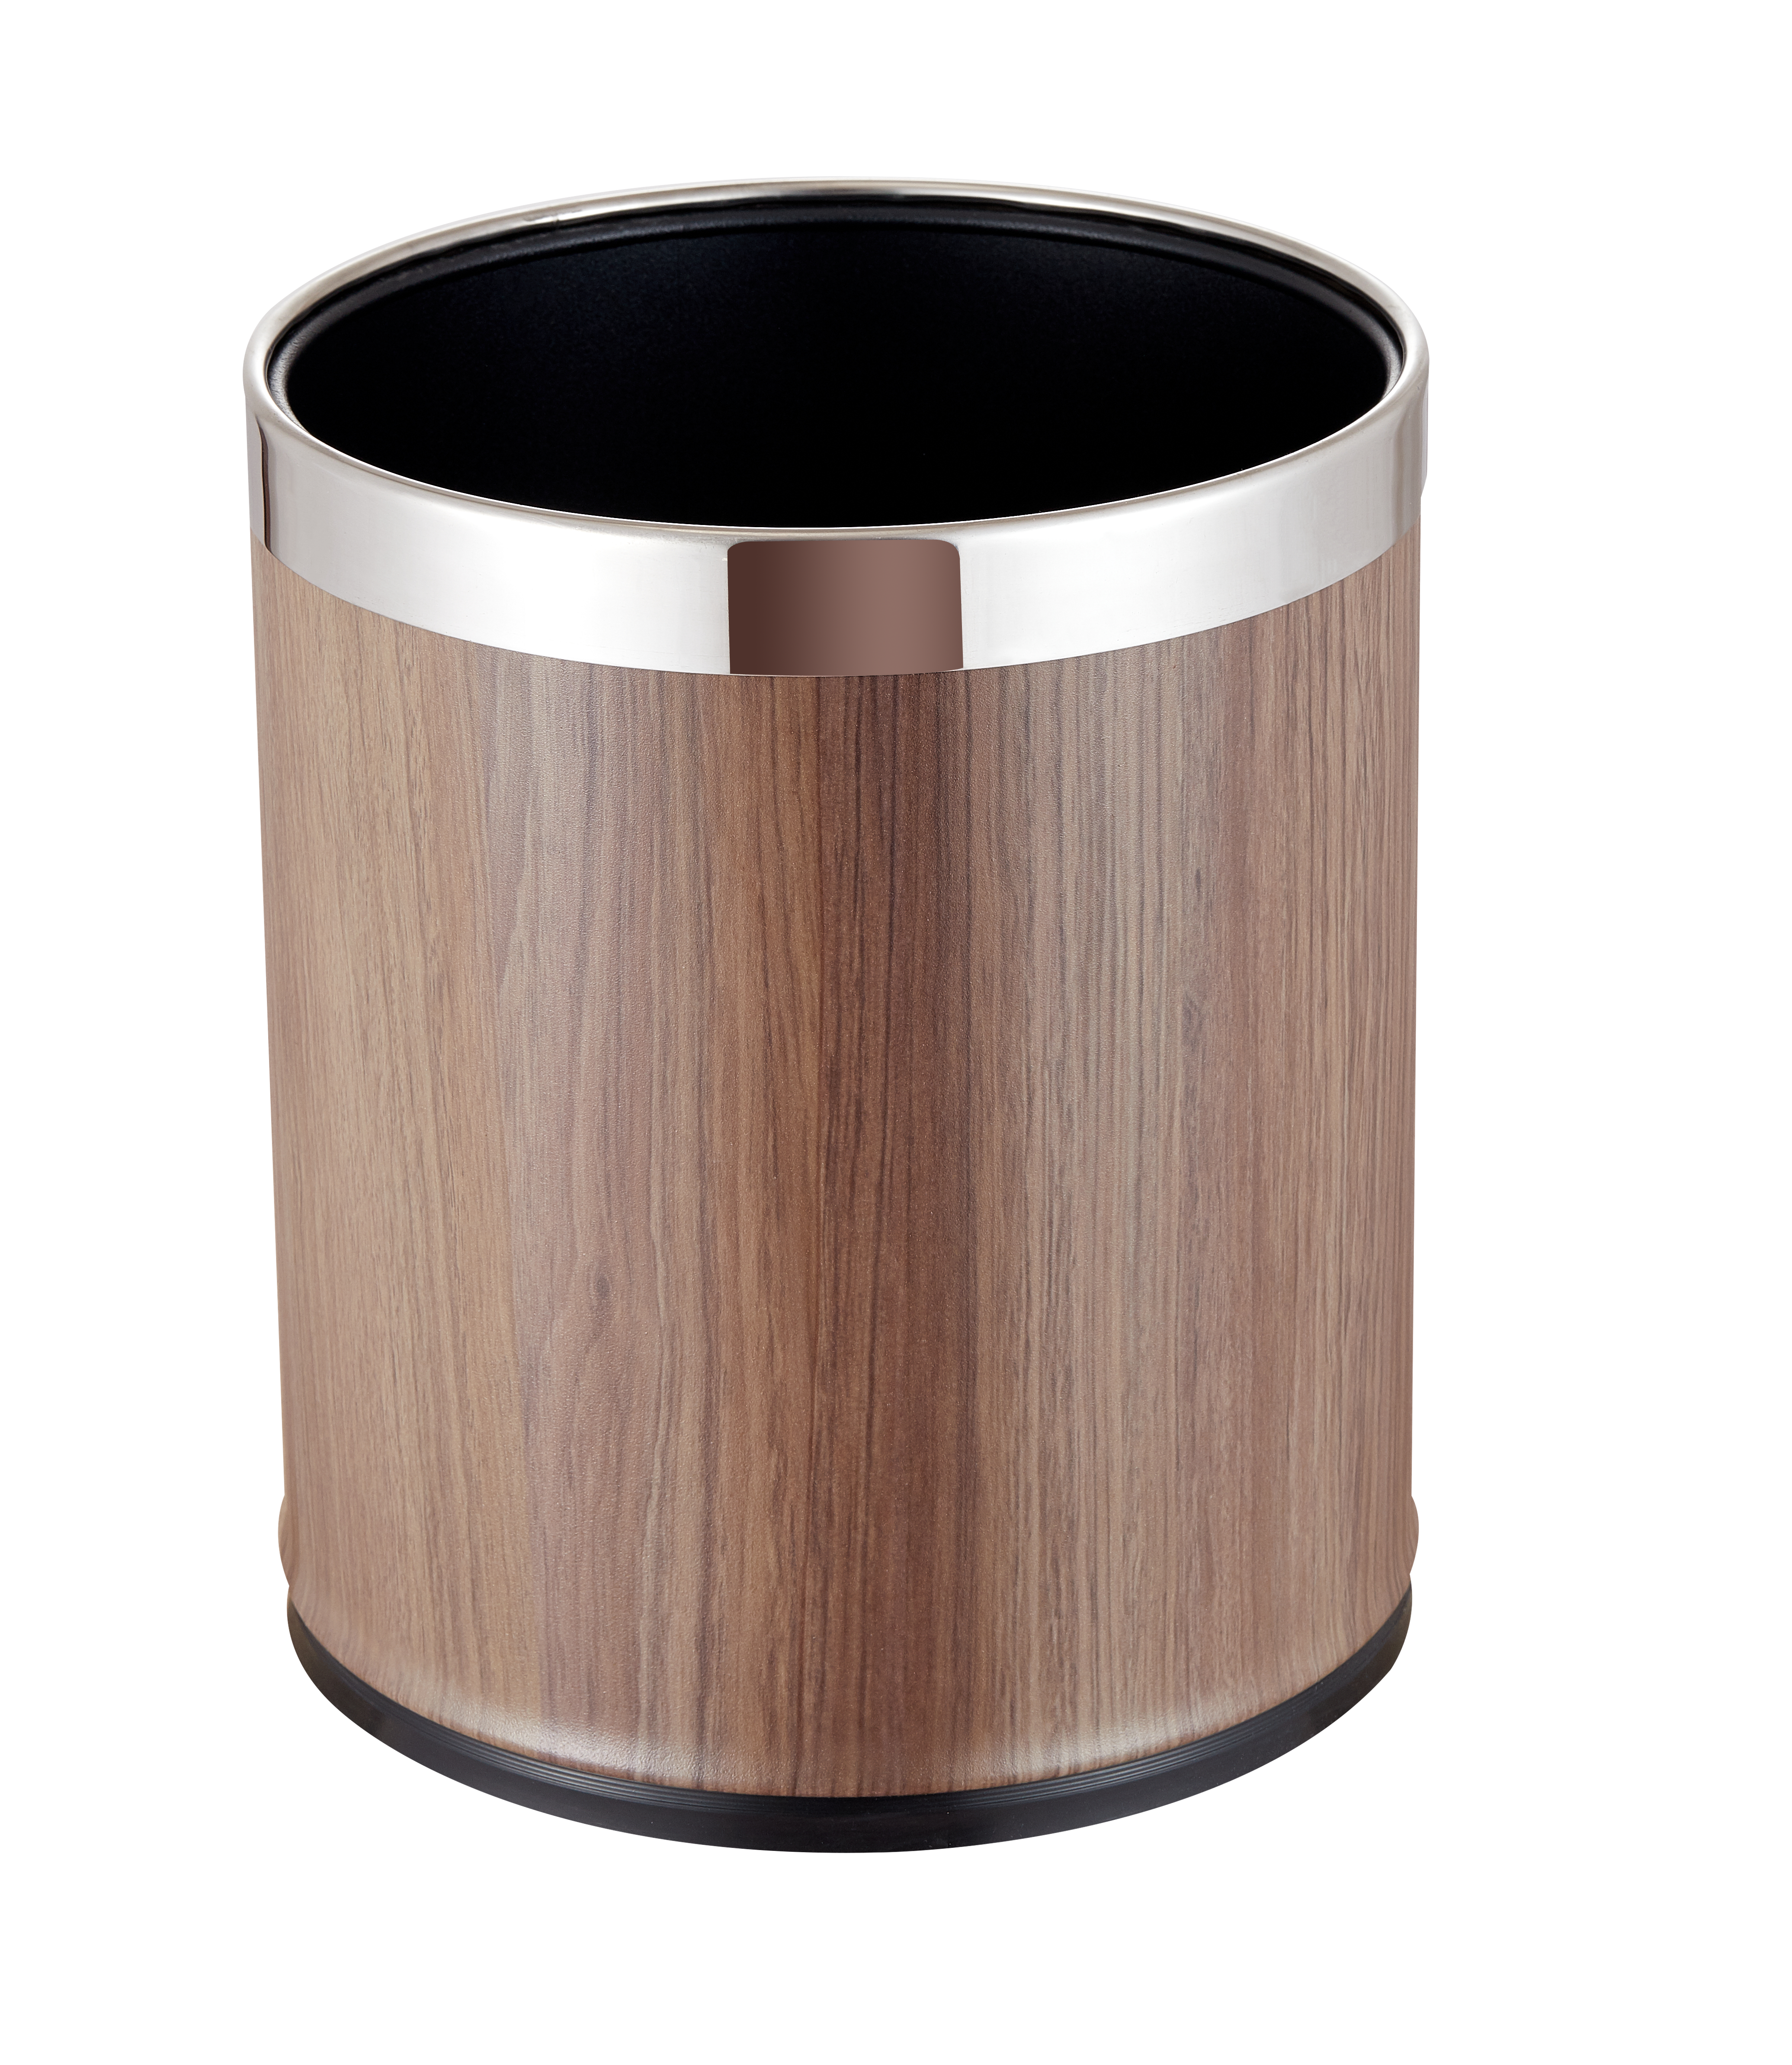 Doubly Layer Metal Trash Can With Leather Covered for Hotel Room (KL-06)